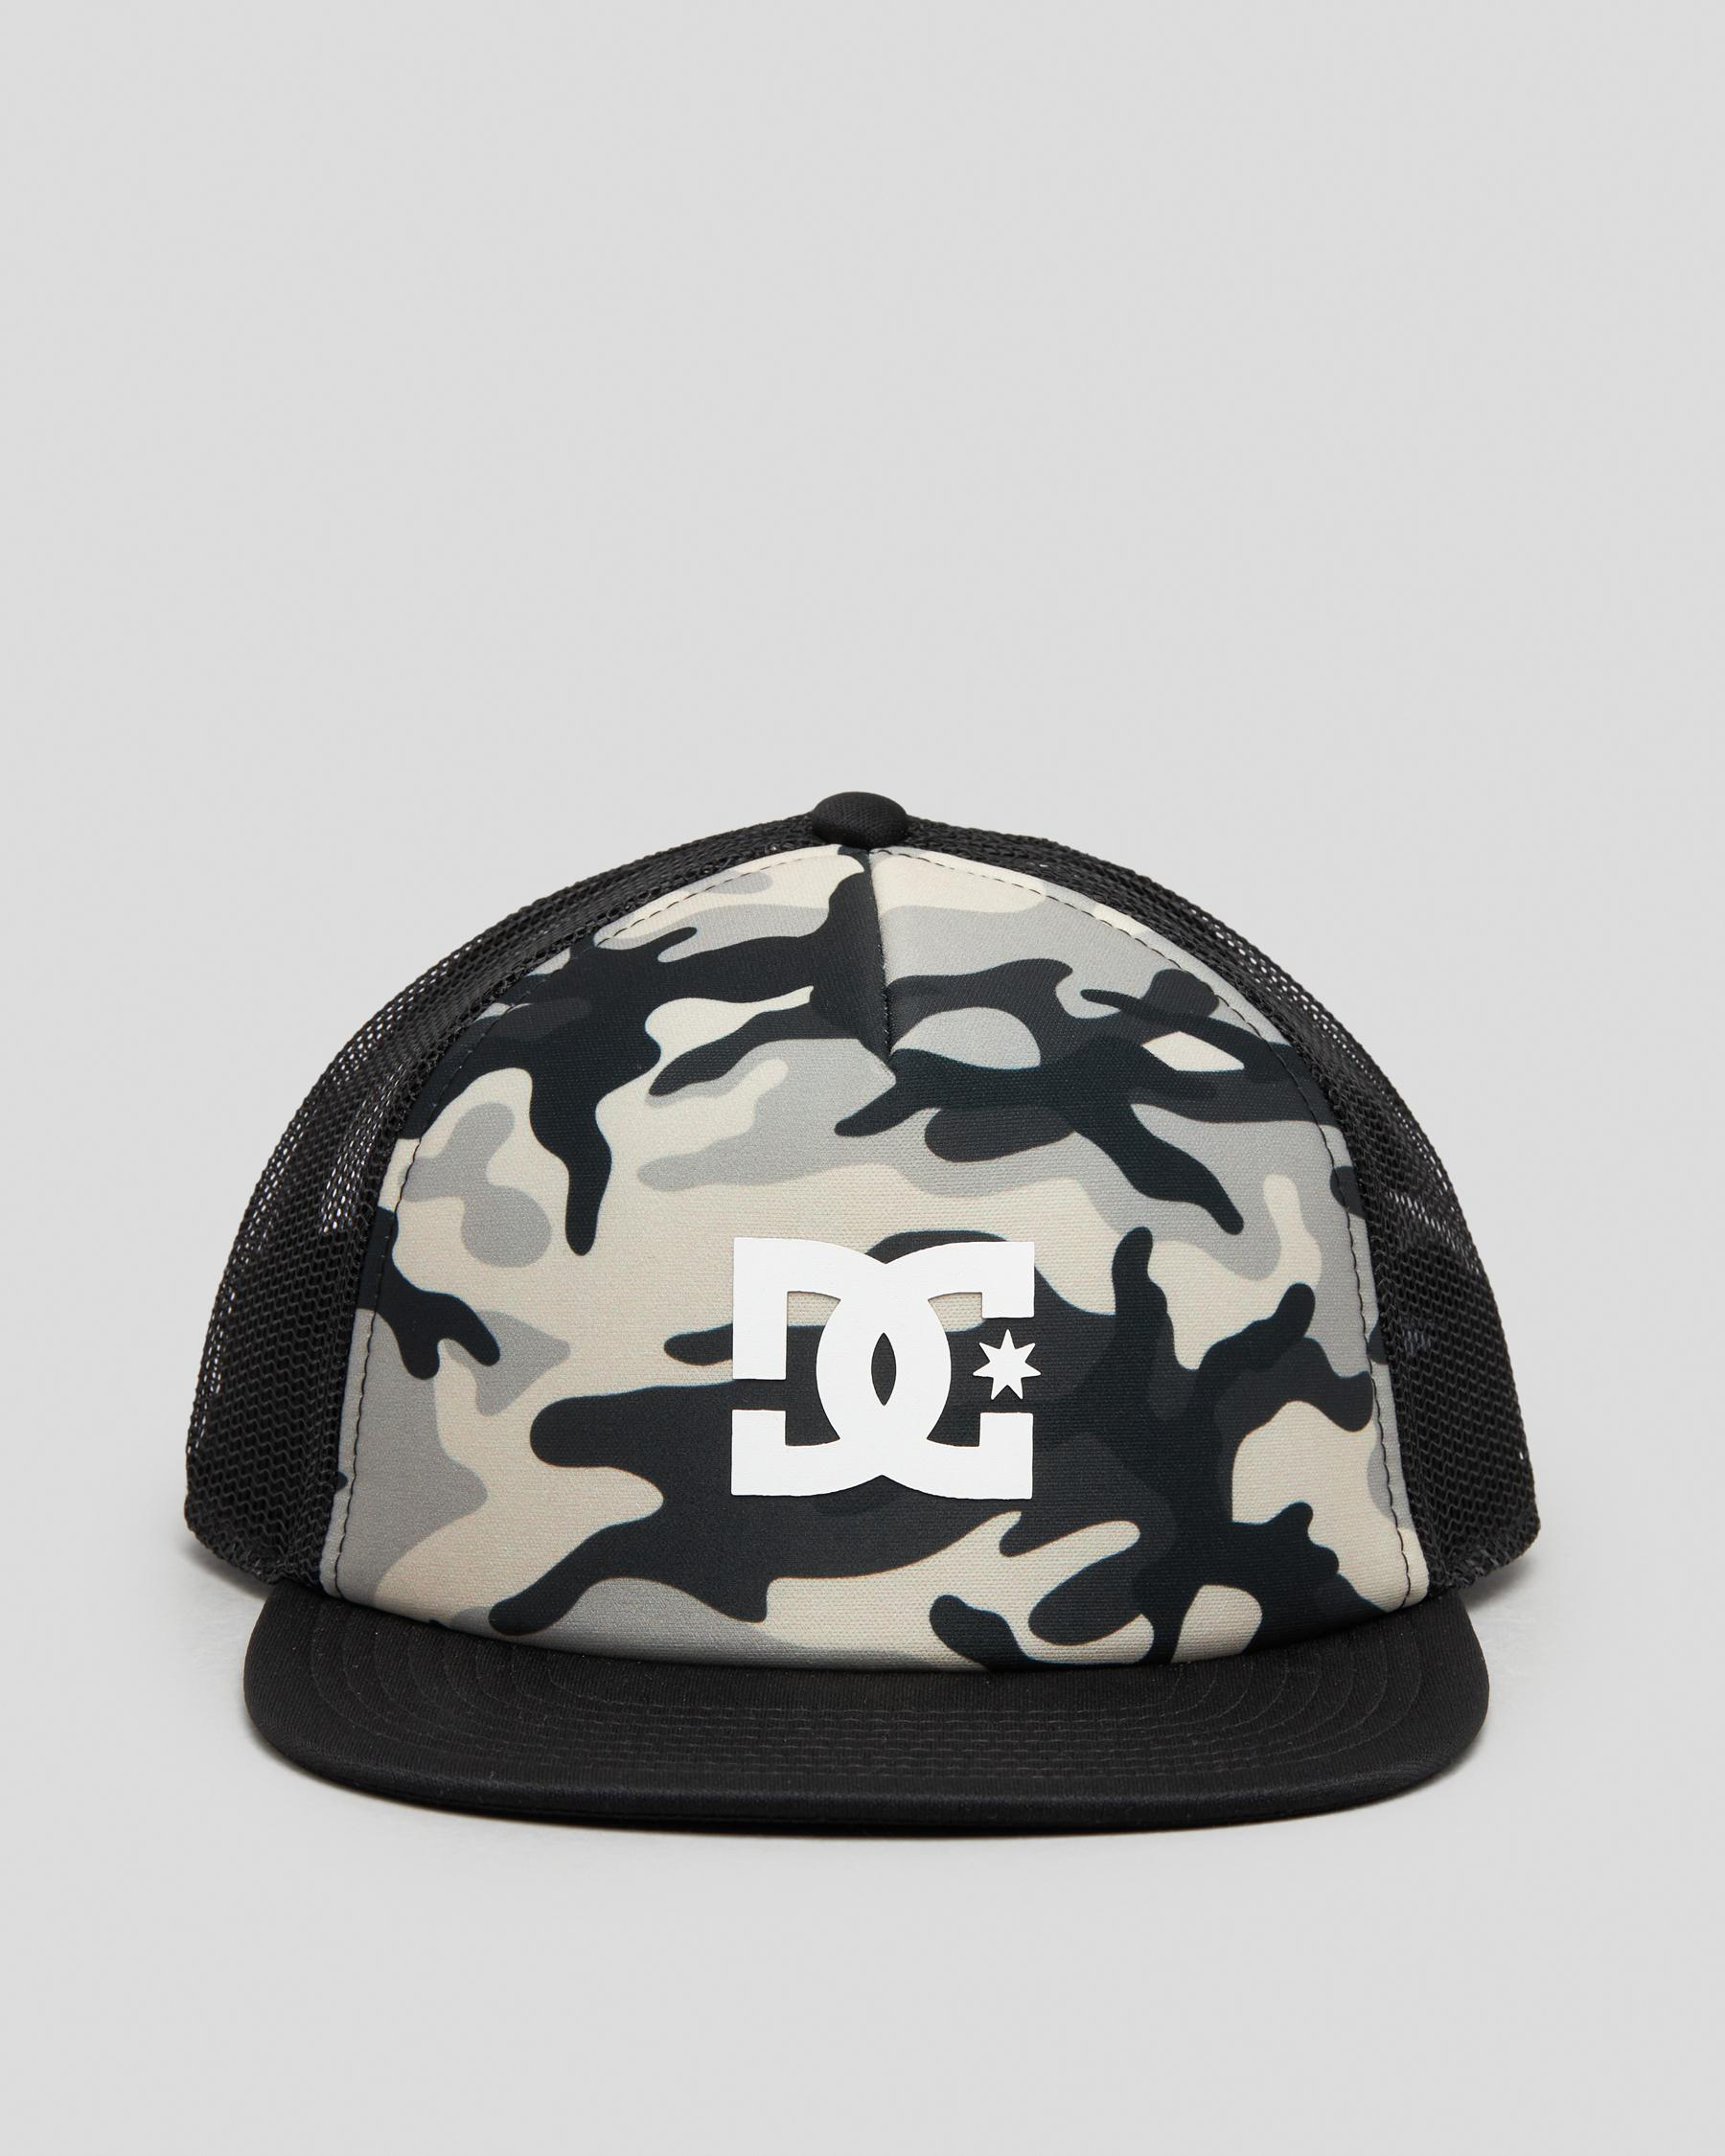 Station & - Gas Camo Boys\' City Shipping FREE* States Easy Returns Cap - United Stone Beach In Shoes DC Trucker